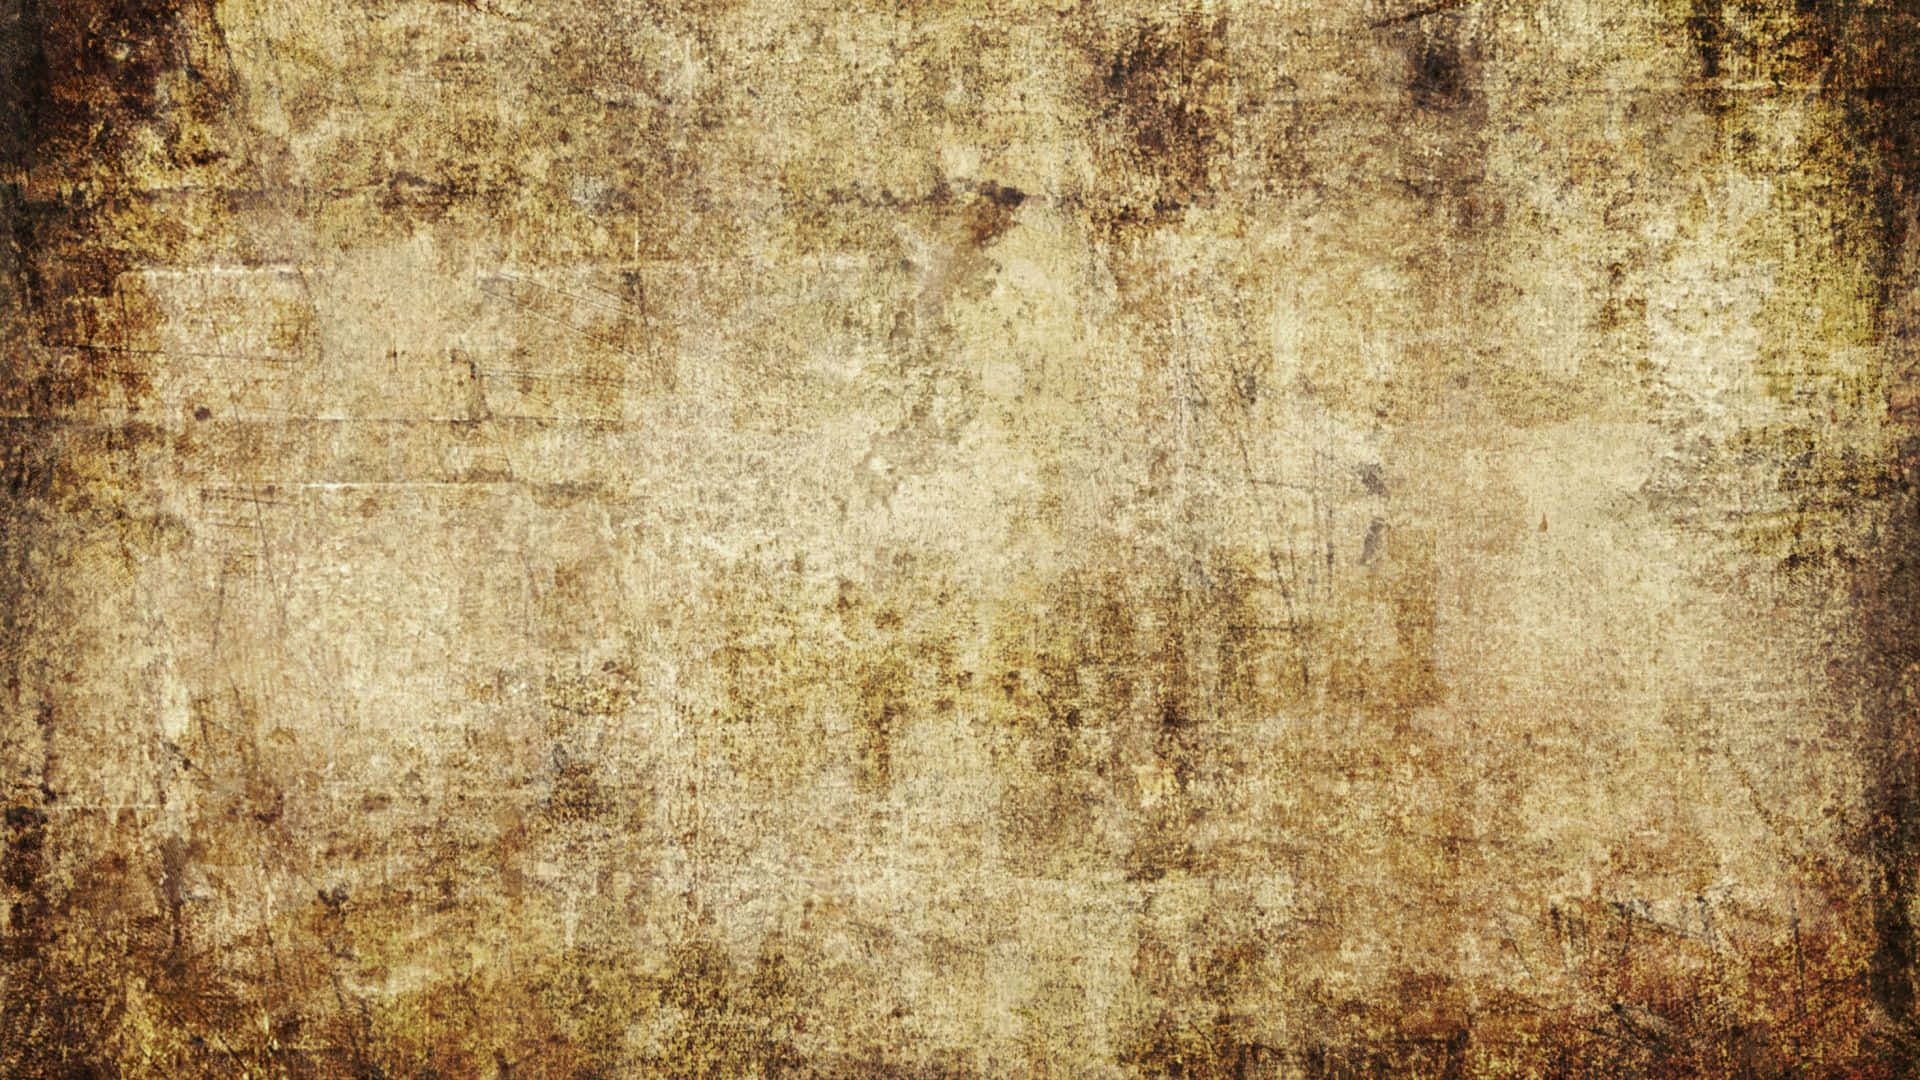 Grungy Texture Background With A Brown Color